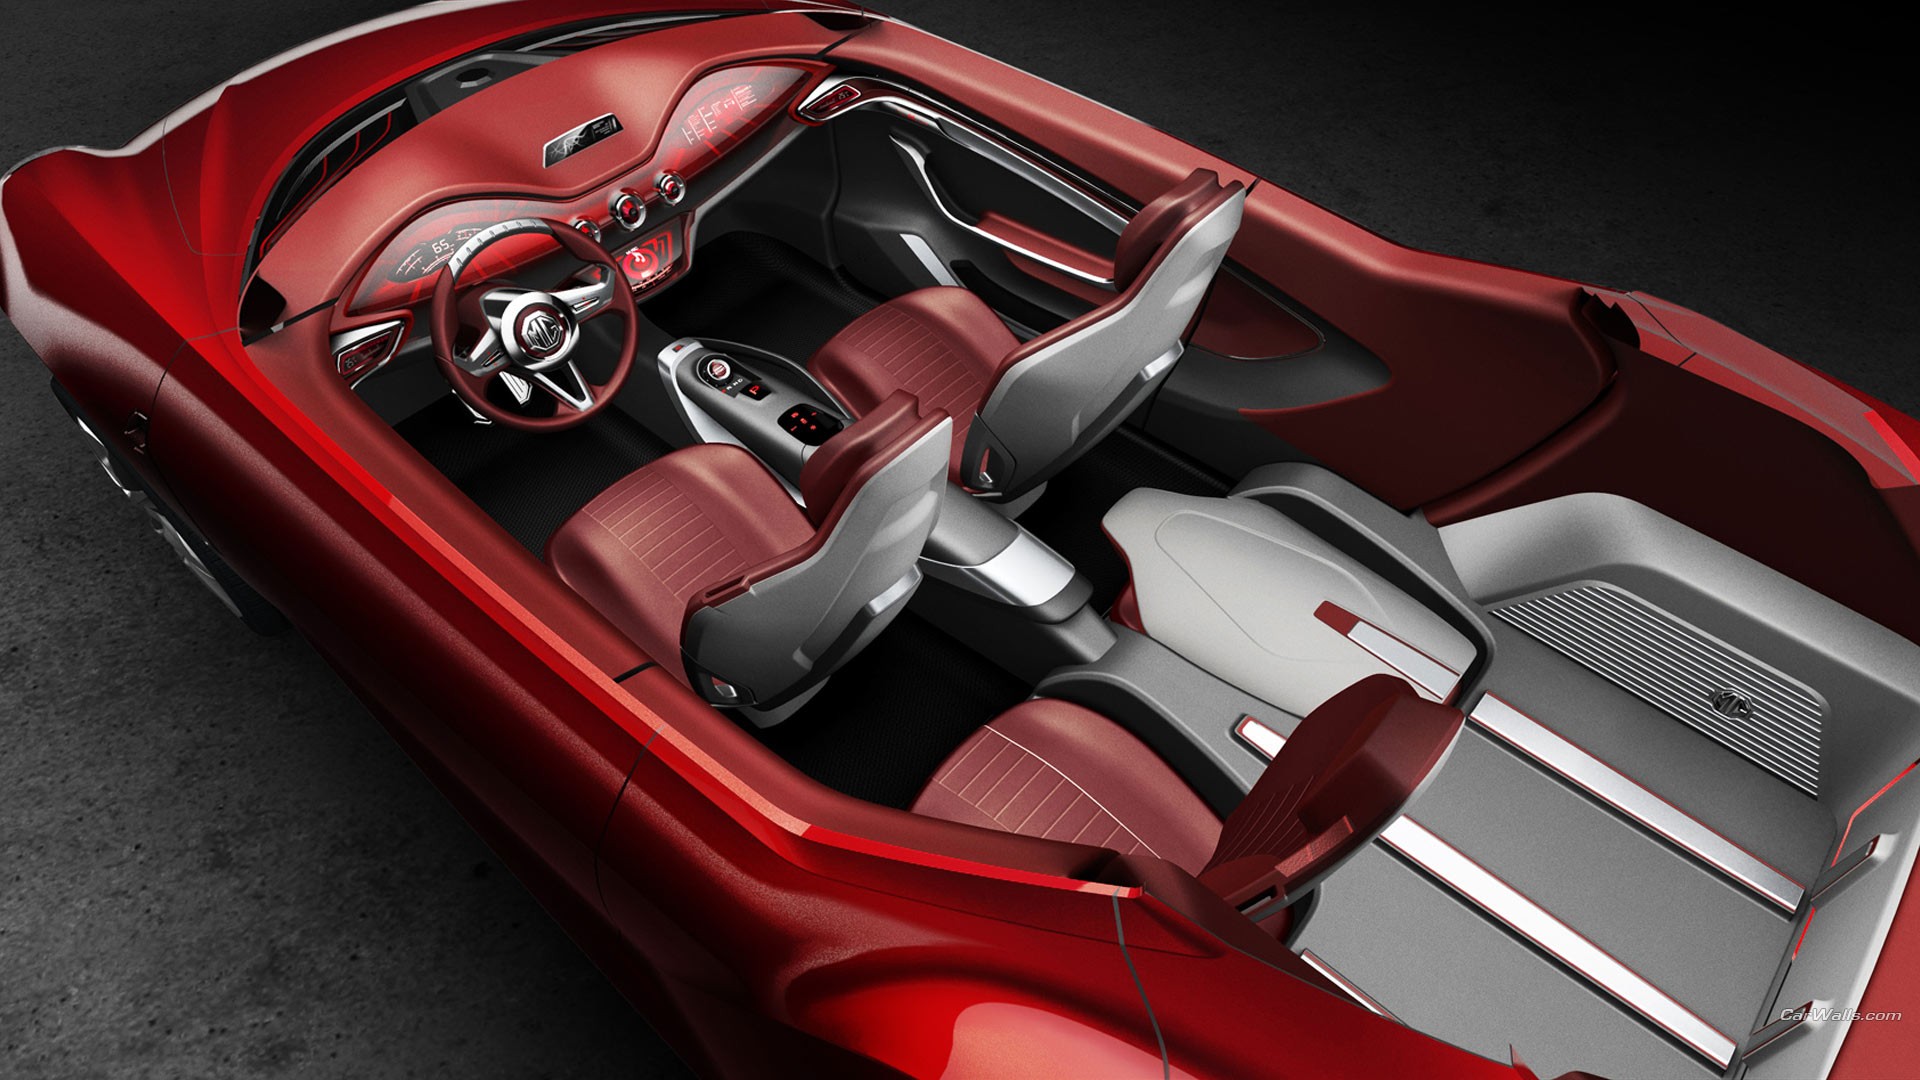 General 1920x1080 MG Icon concept cars red cars vehicle car interior car Chinese cars